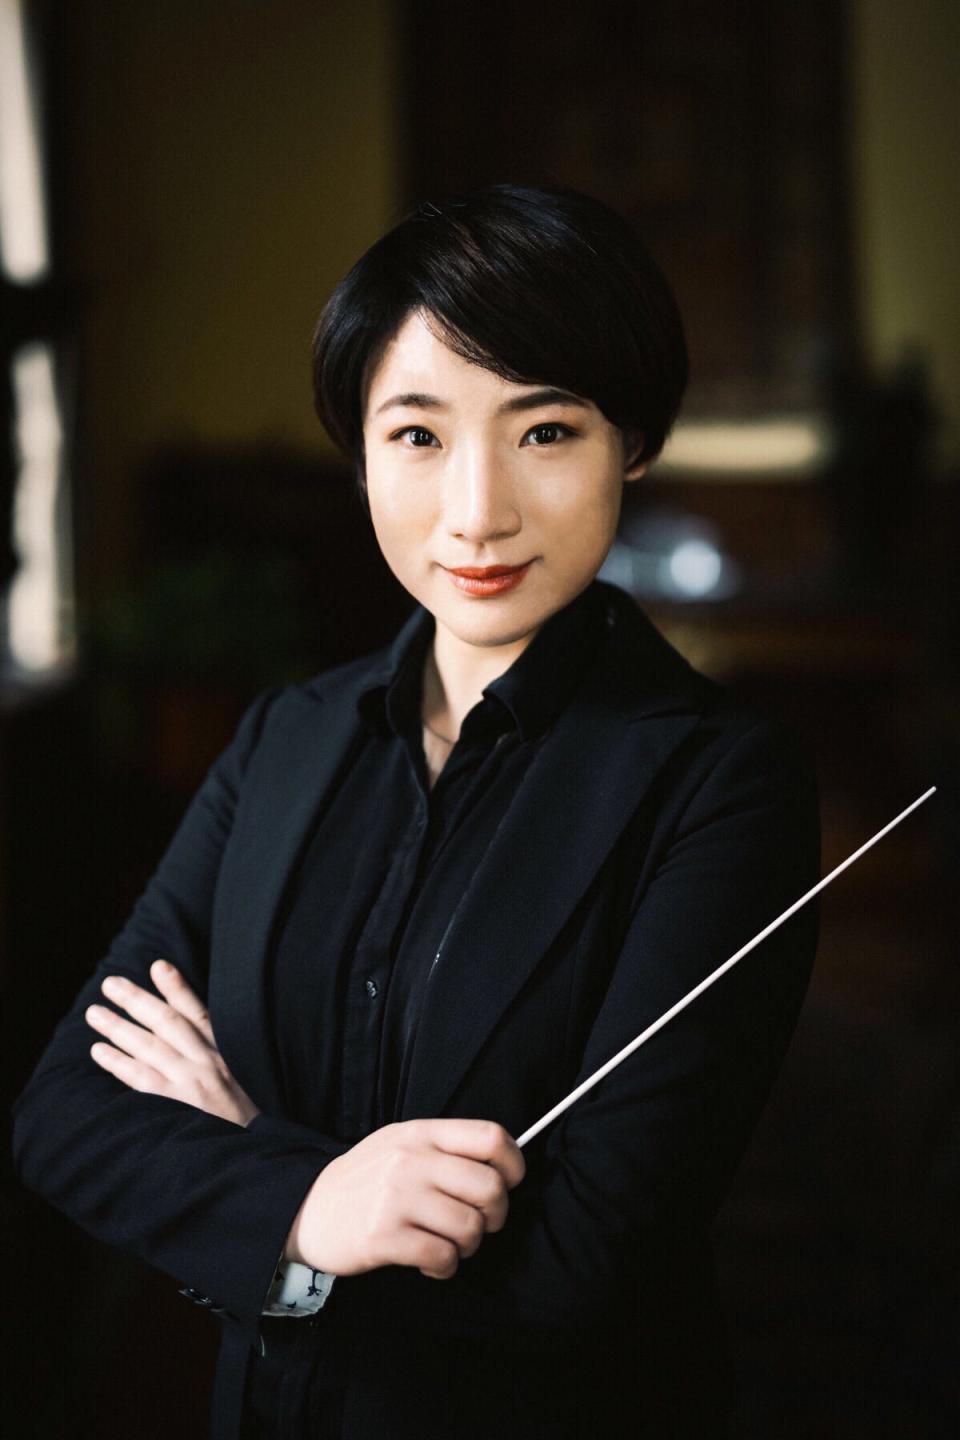 Yue Bao is the guest conductor of the Sarasota Orchestra Discoveries concert “Cheers to the Music of Dance.”